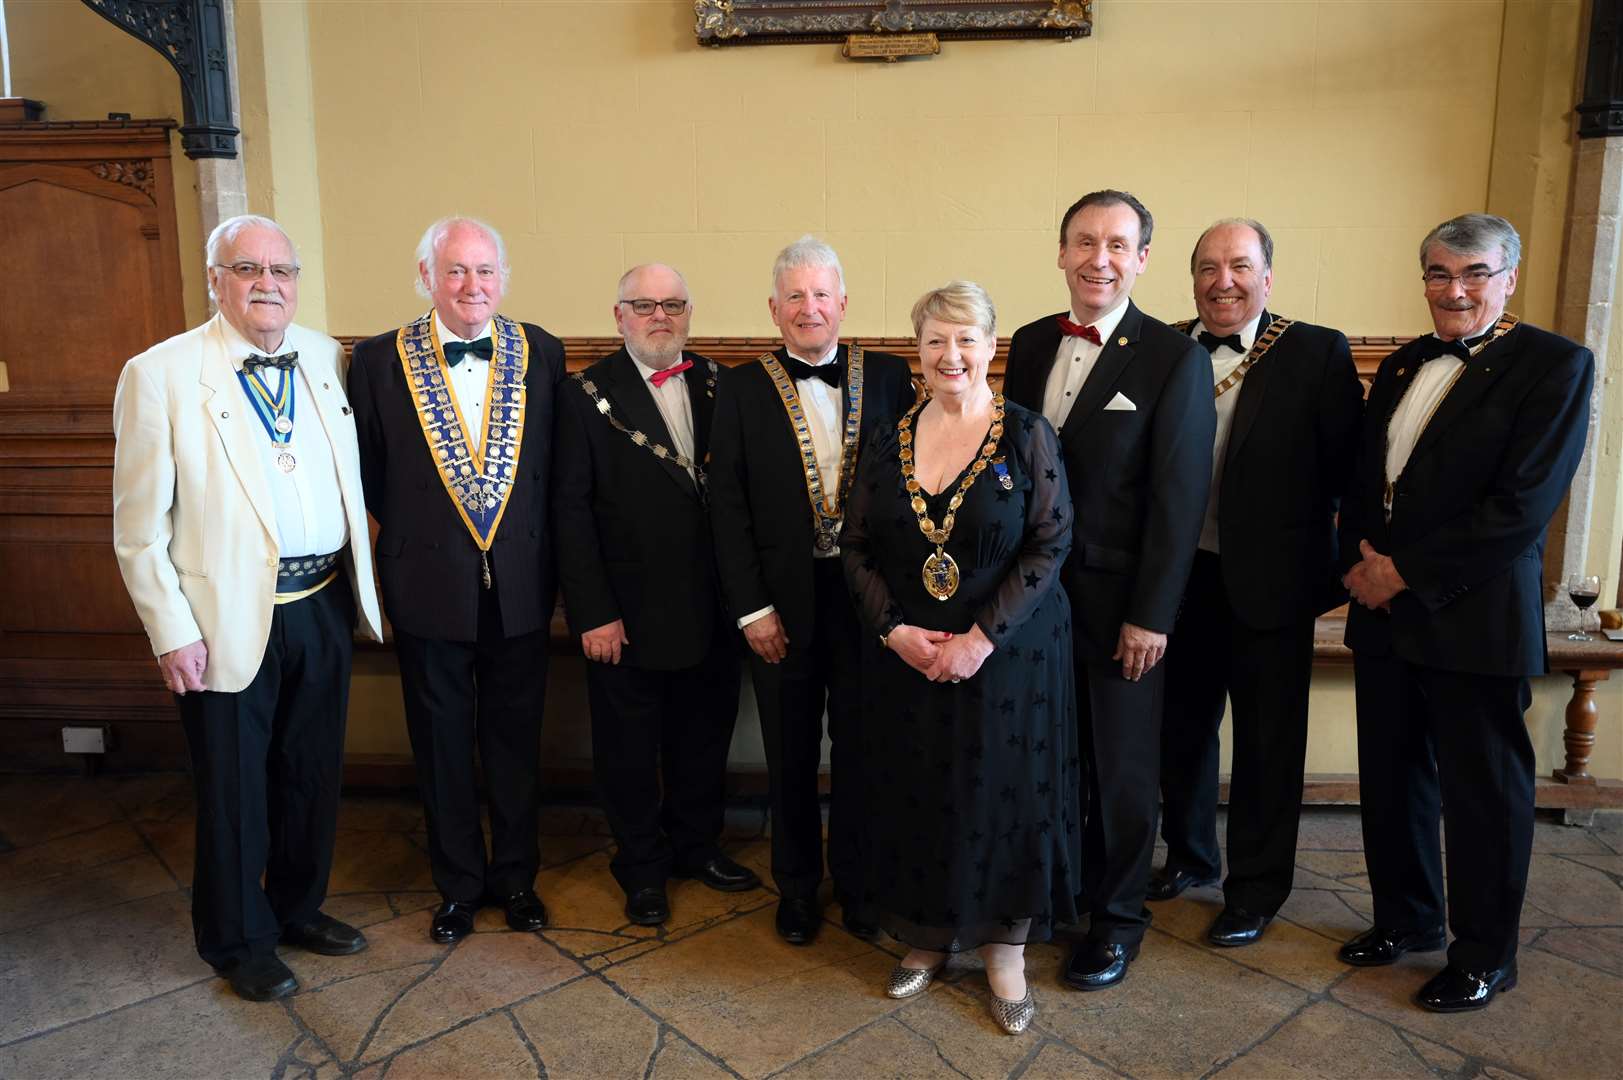 The black-tie event took place at the Town Hall, Lynn